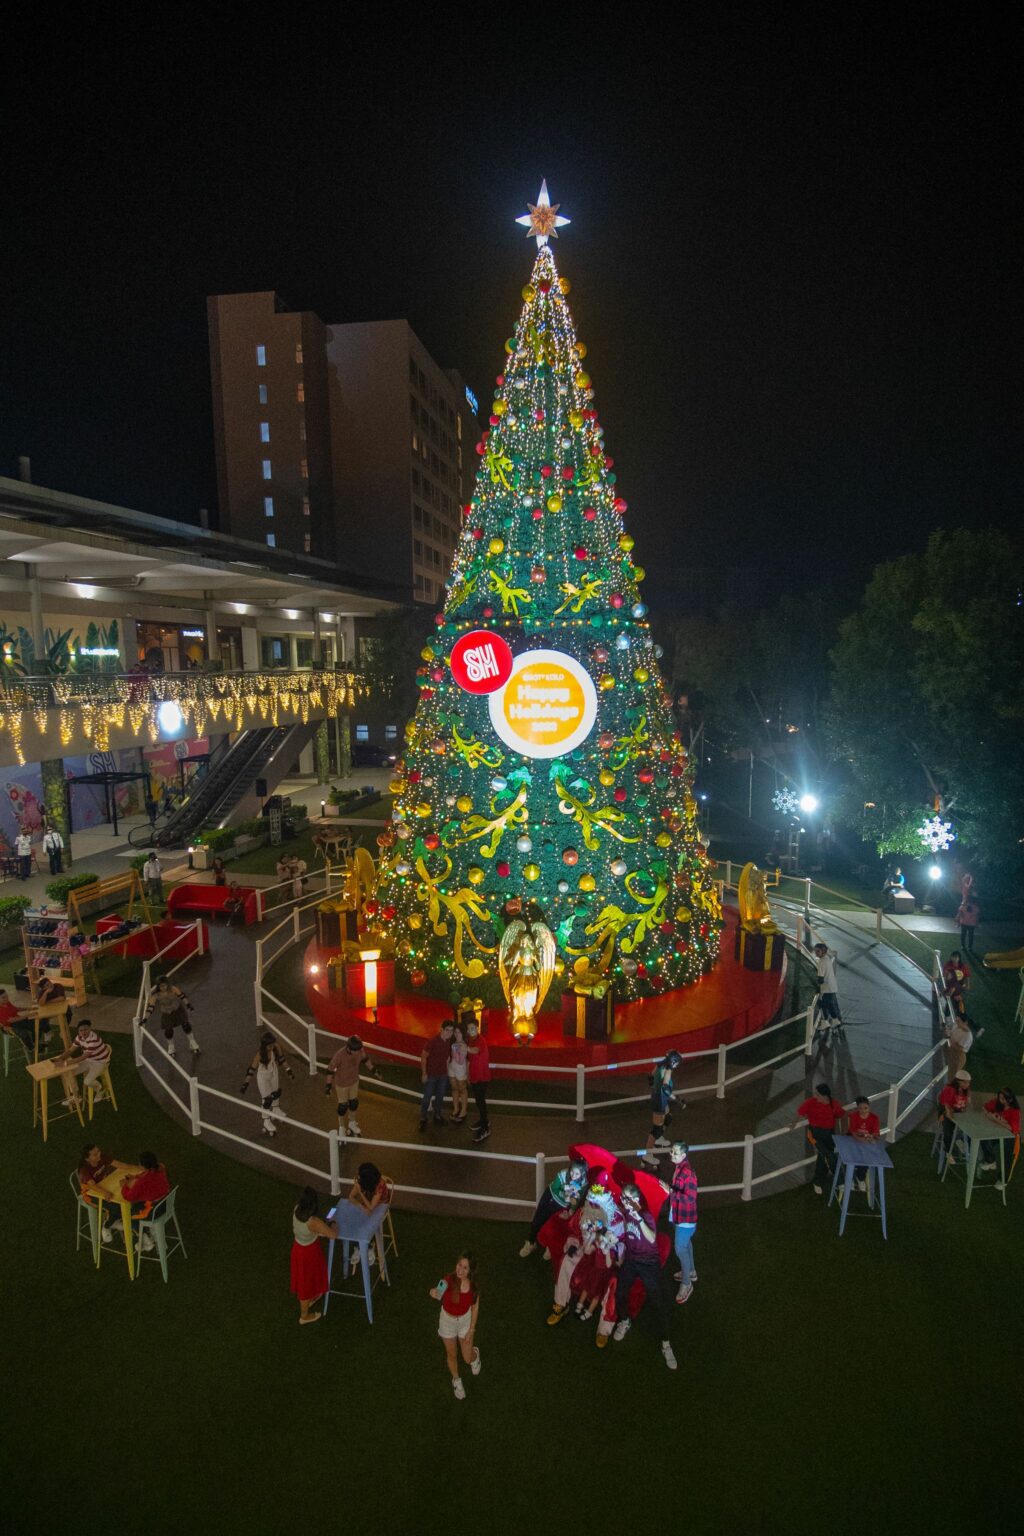 Dubbed as the tallest Christmas tree in Iloilo City, this 60-foot tree is one of SM City Iloilo’s contributions to spread the holiday cheer. Located at SM City Iloilo’s Southpoint, it features, among others, gift boxes and custom-made “Angels of Light” – a perfect backdrop for that snazzy holiday season selfie, souvenir family photo or barkada groupfie. Complementing the giant Christmas tree is a skating rink/pond where kids and the kids-at-heart can live out a delightful “Christmas at the park”.